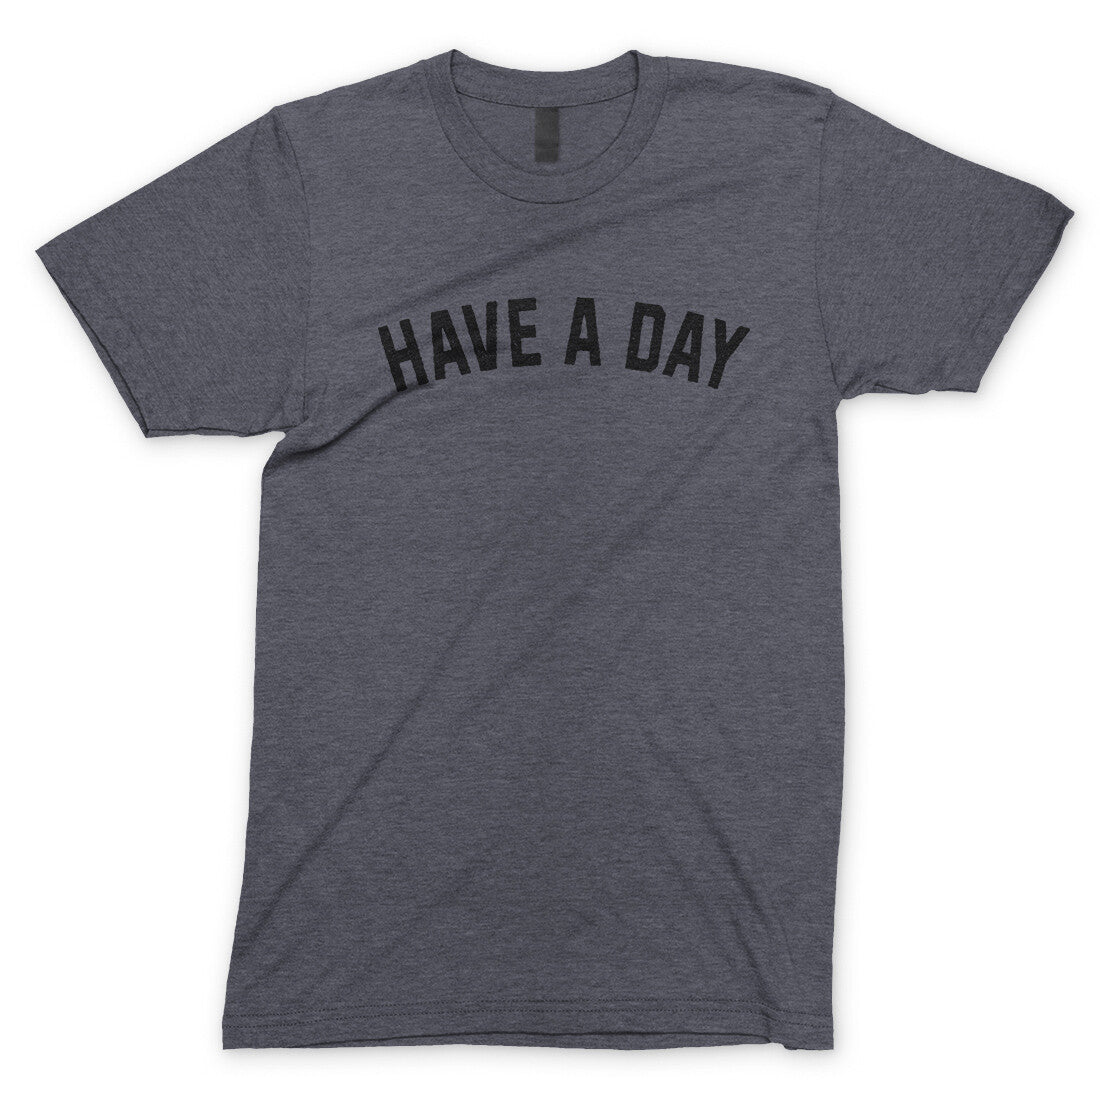 Have a Day in Dark Heather Color